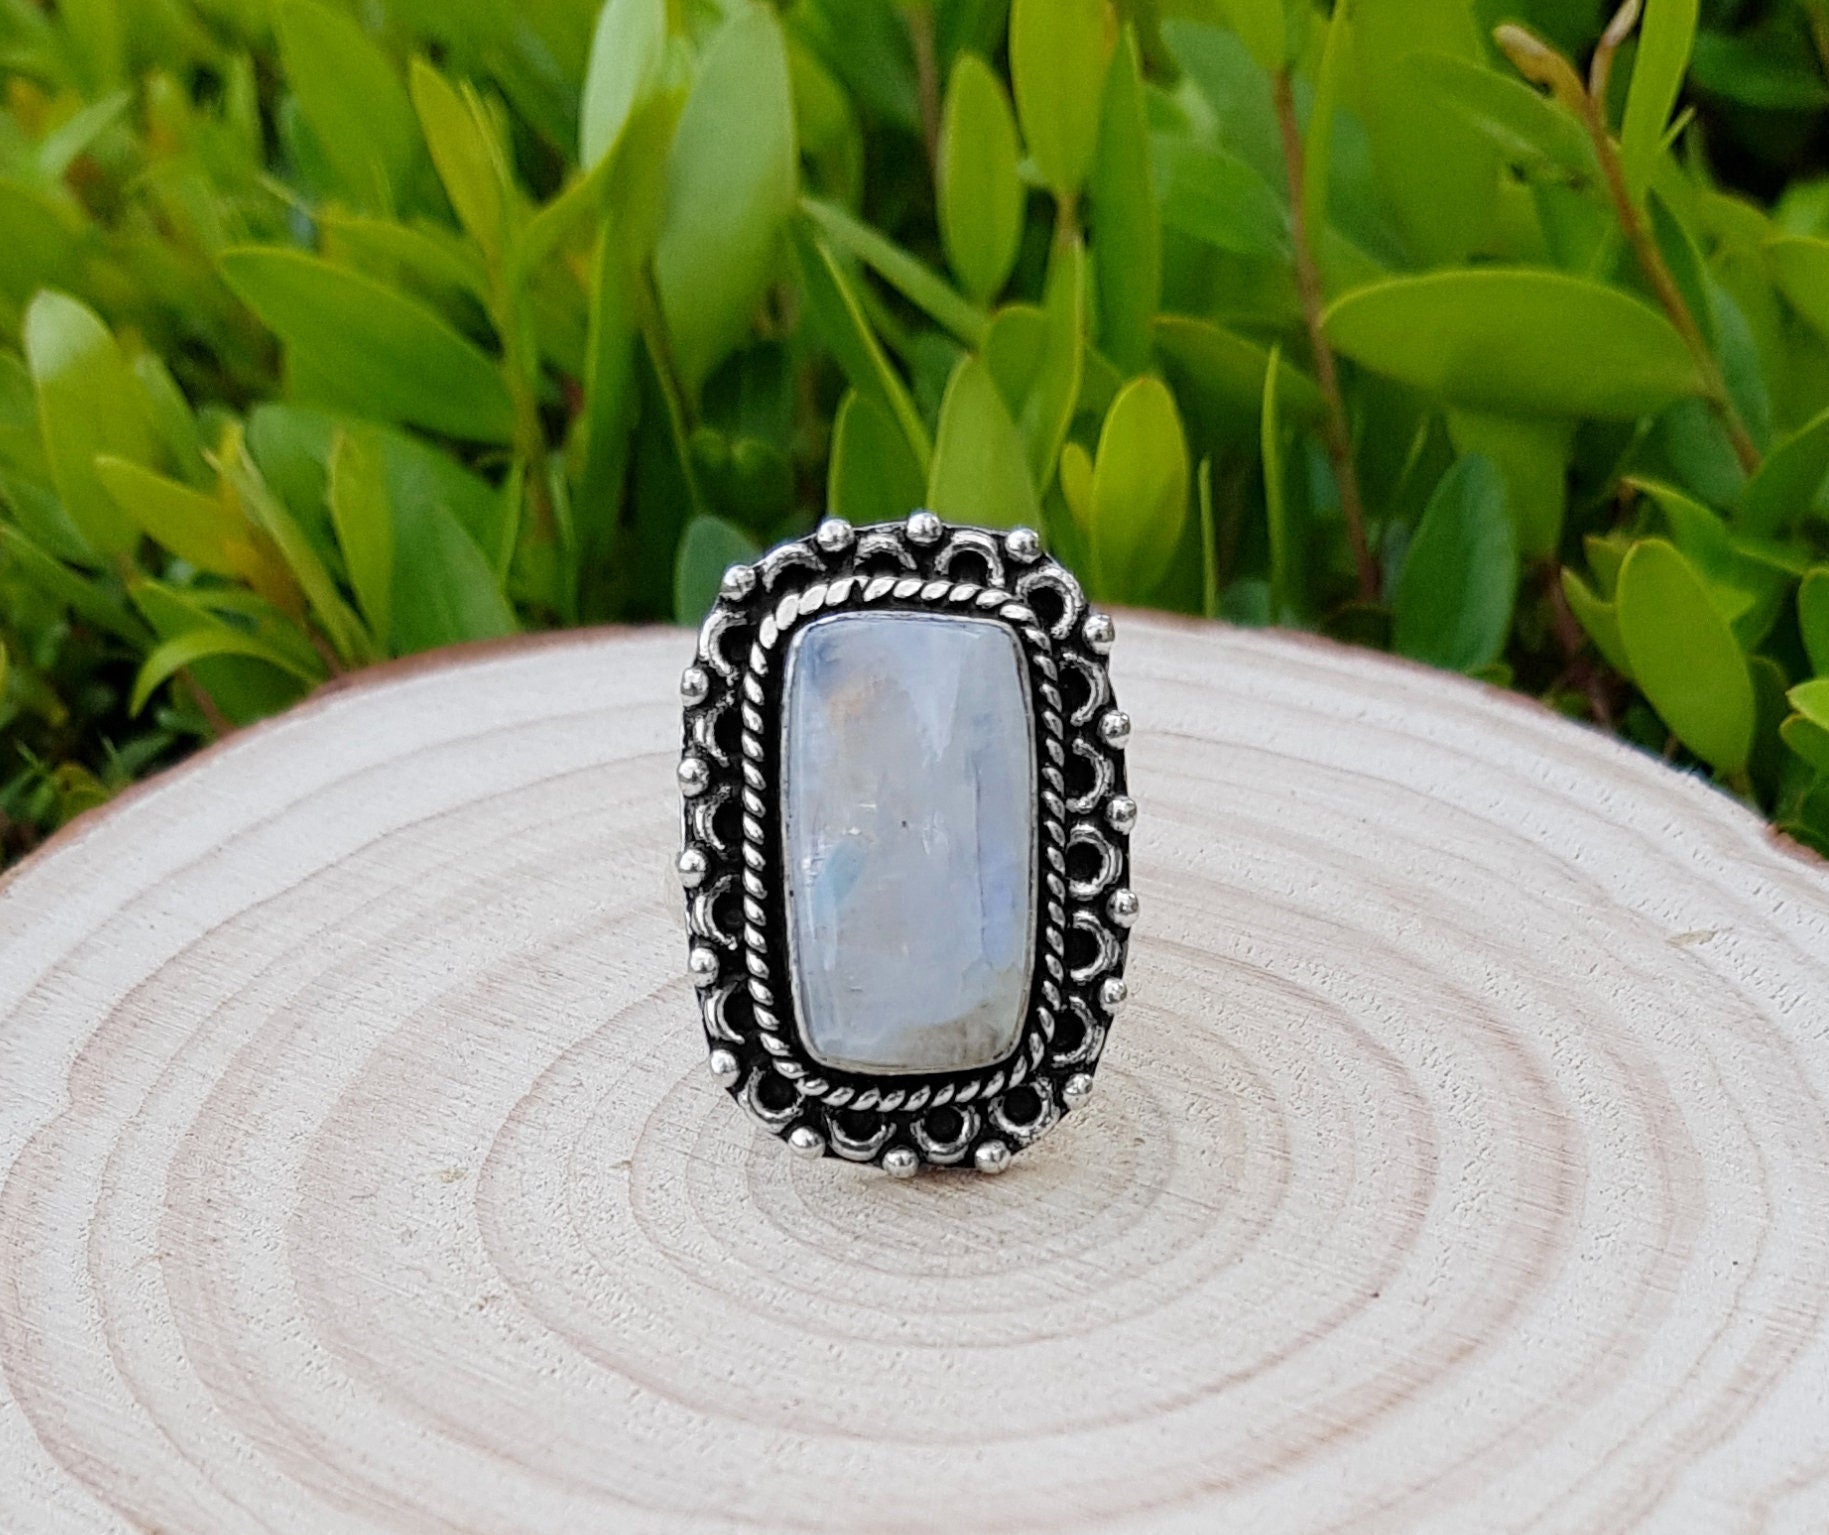 Rainbow Moonstone Statement Ring Sterling Silver Boho Rings Size US 7 1/2 Unique Jewelry One Of A Kind Gift GypsyJewelry